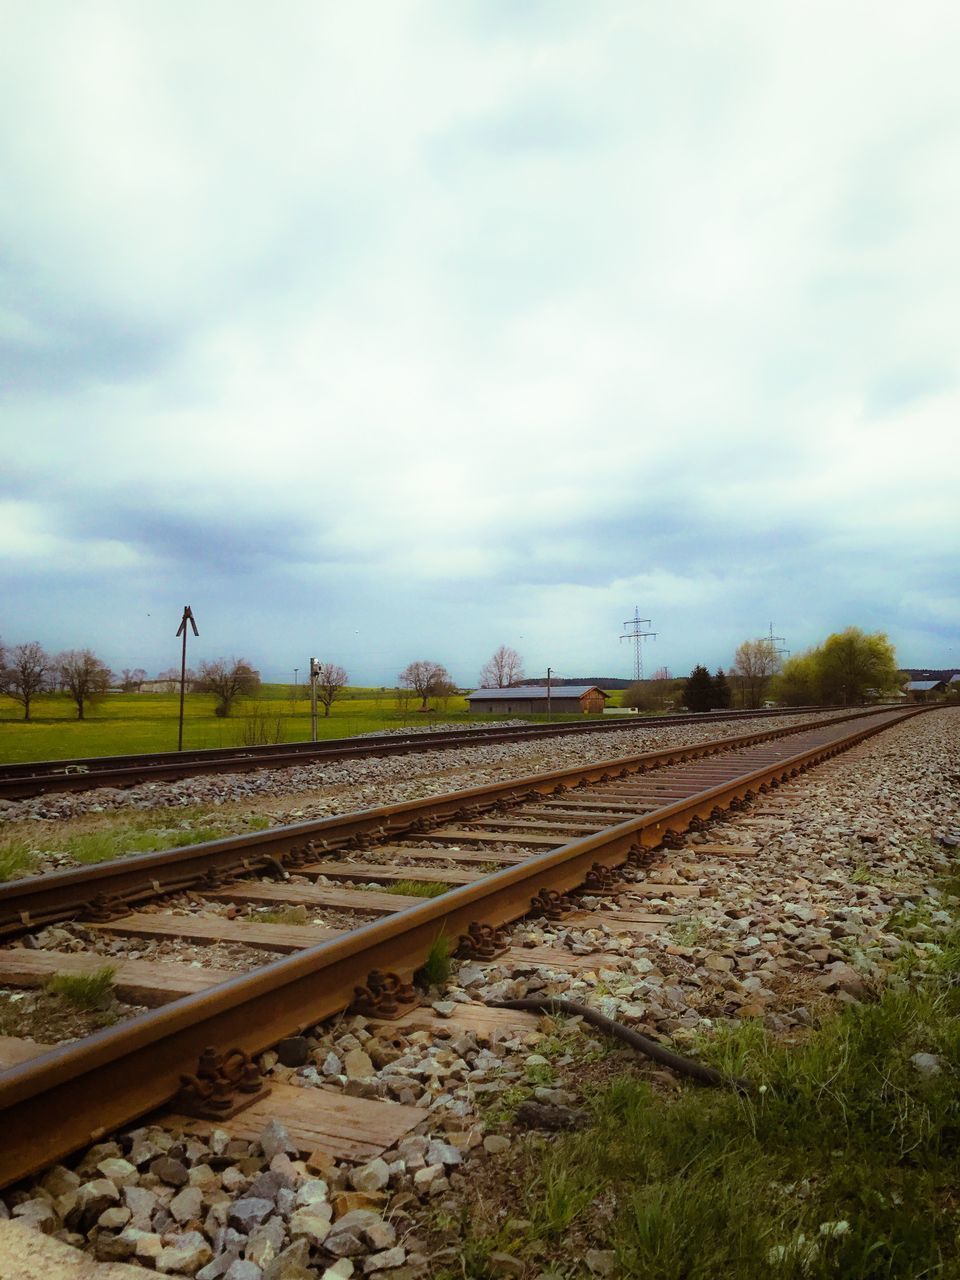 RAILROAD TRACKS BY GRASS AGAINST SKY